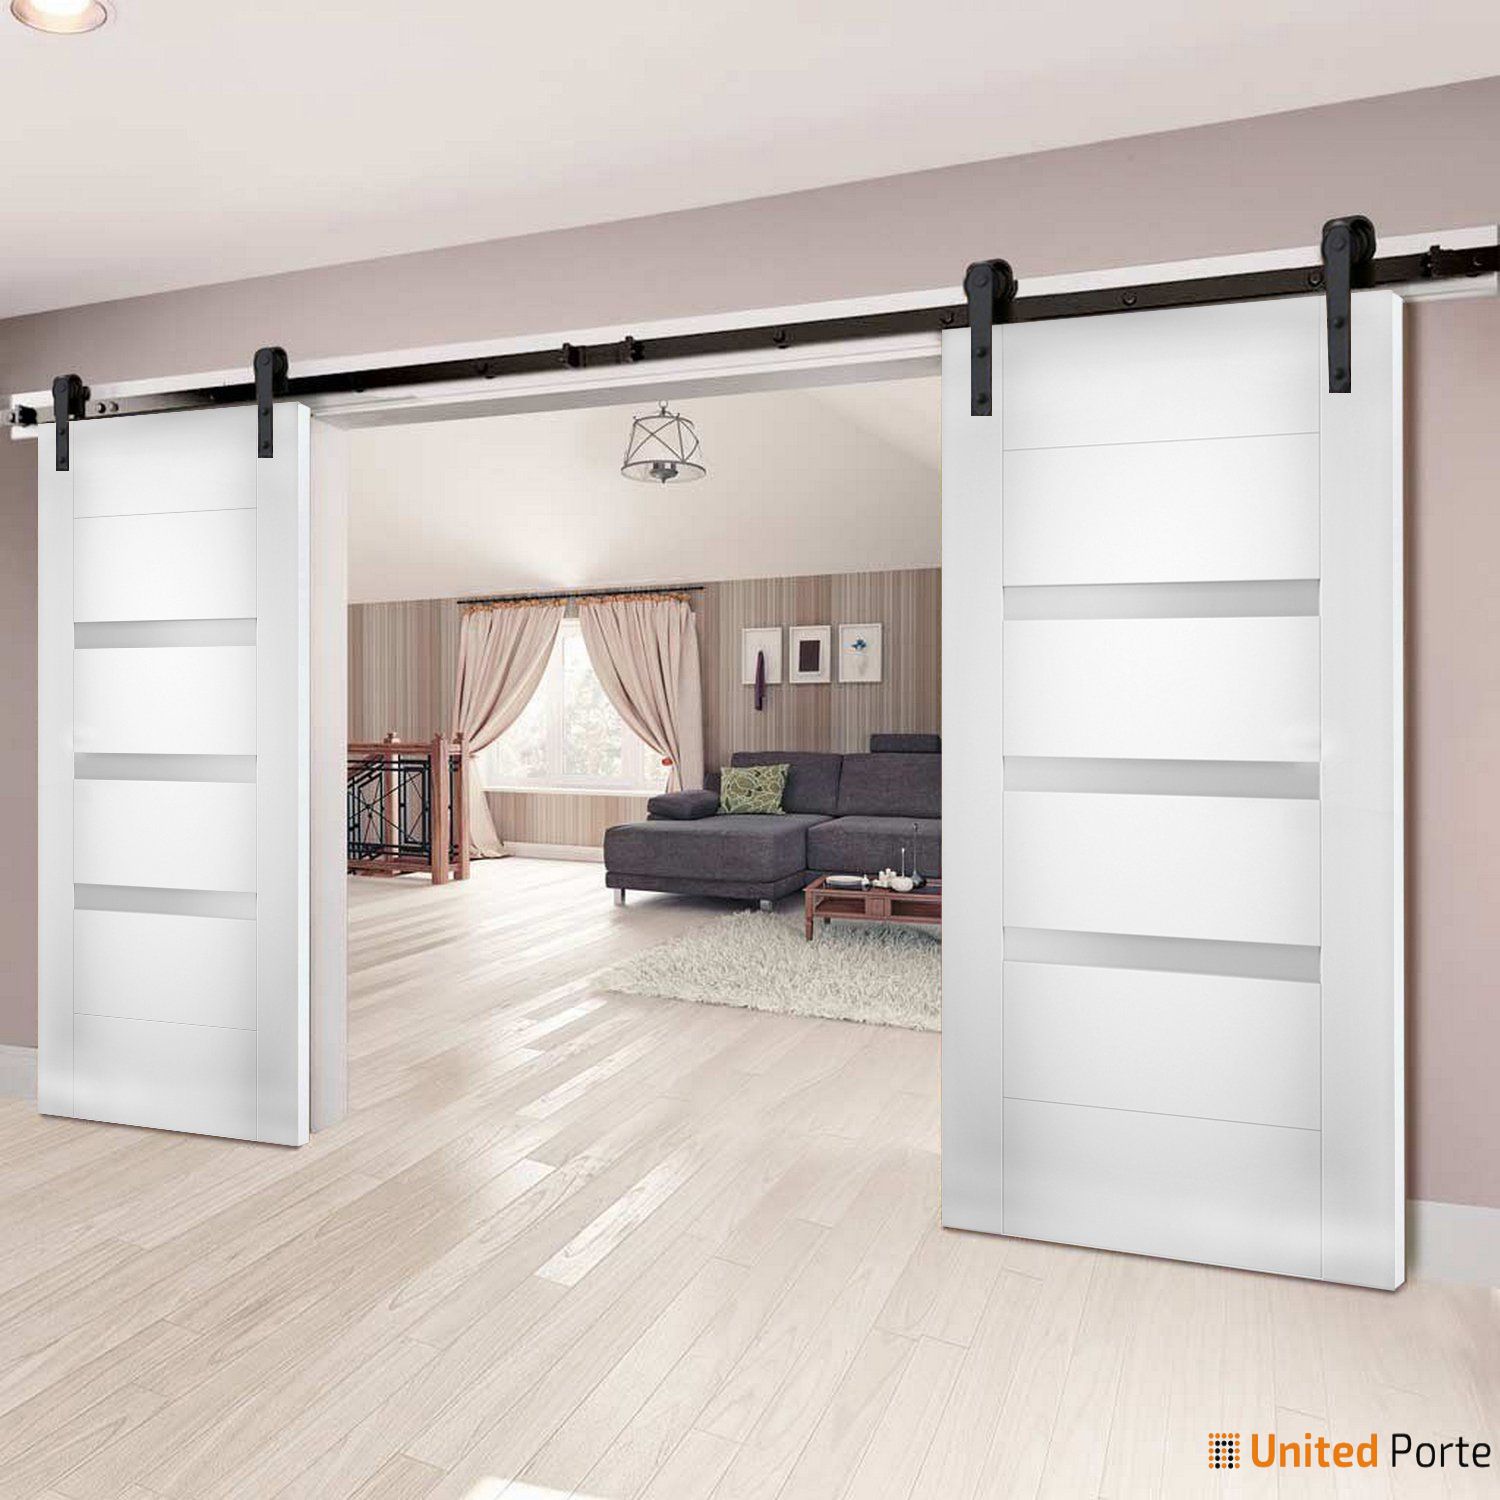 Sete 6900 White Silk Double Barn Door with Frosted Glass | Black Rail